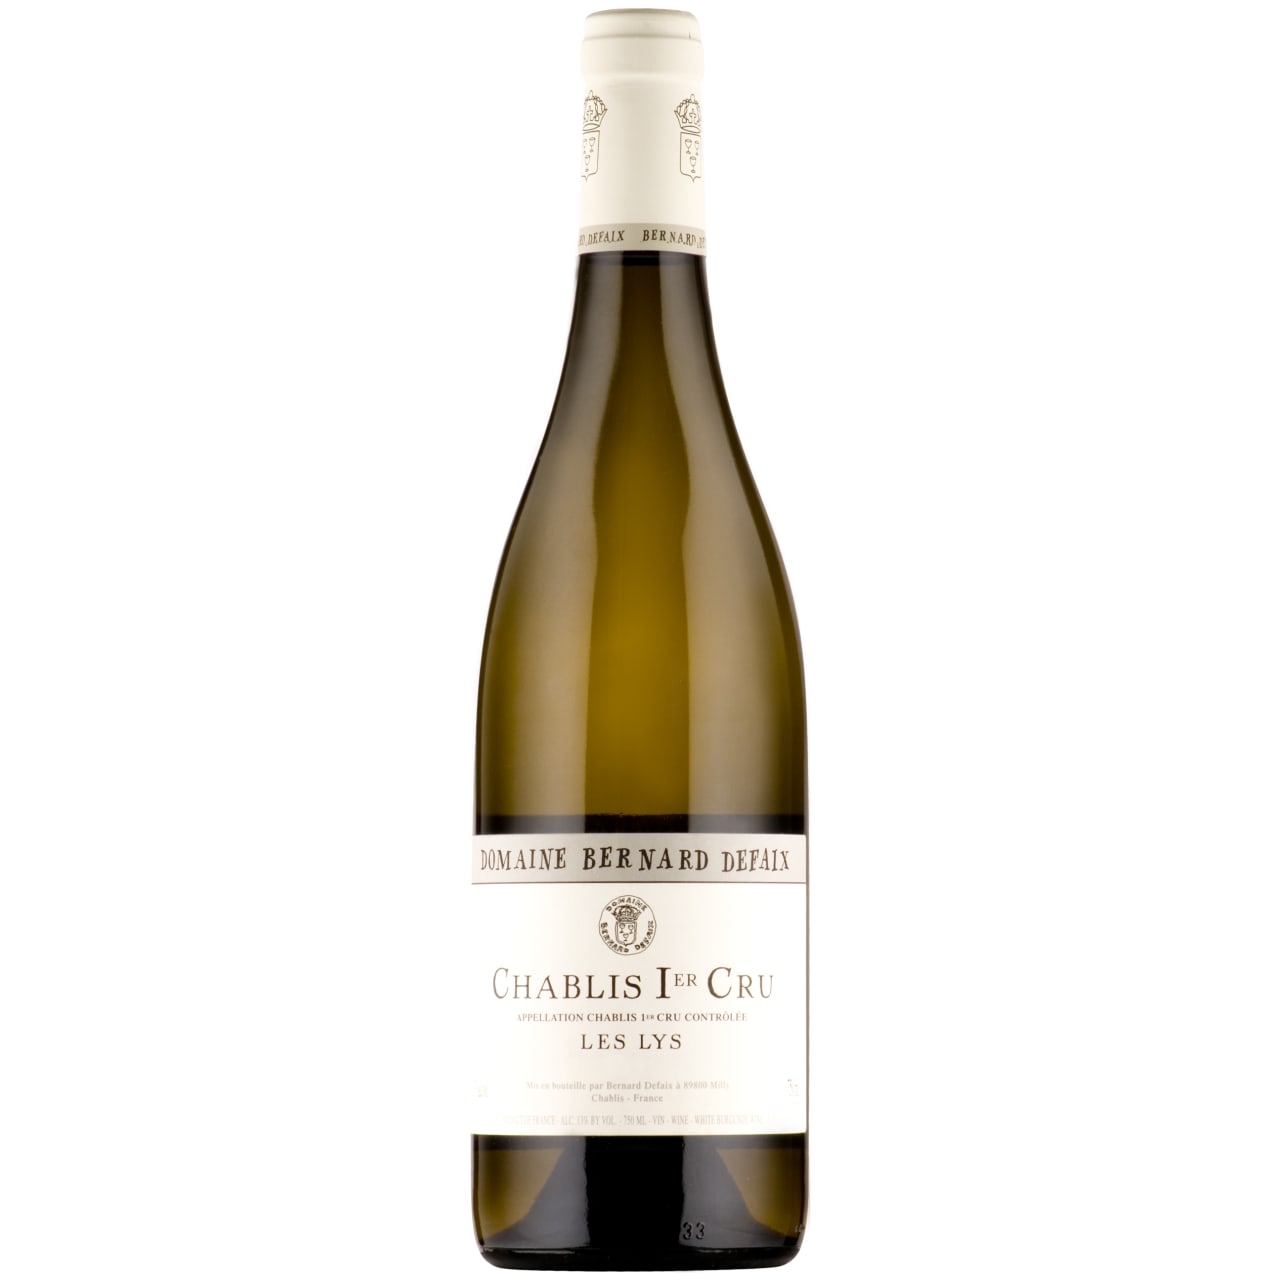 This premier cru is characterized by its aromatic richness, and its fineness on the mouth.